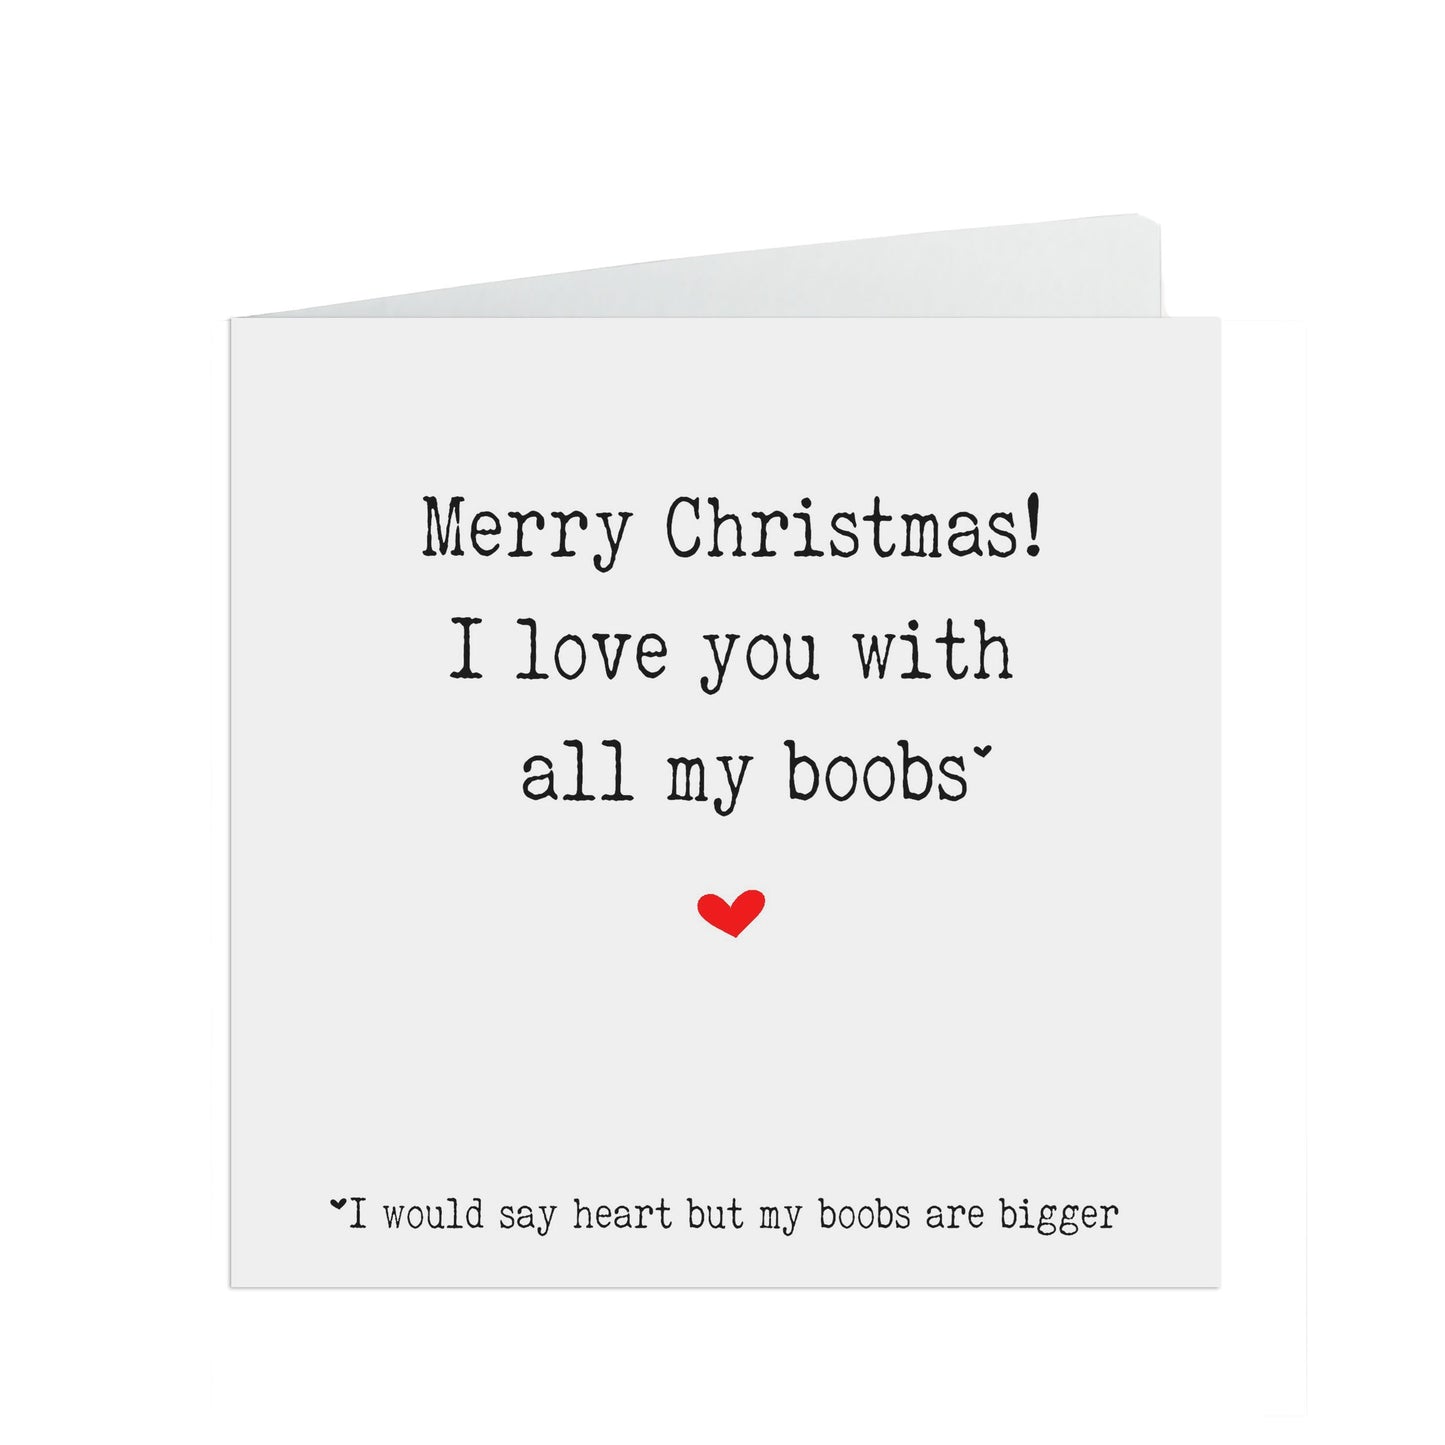 I Love You With All My Boobs, Cheeky Christmas Card